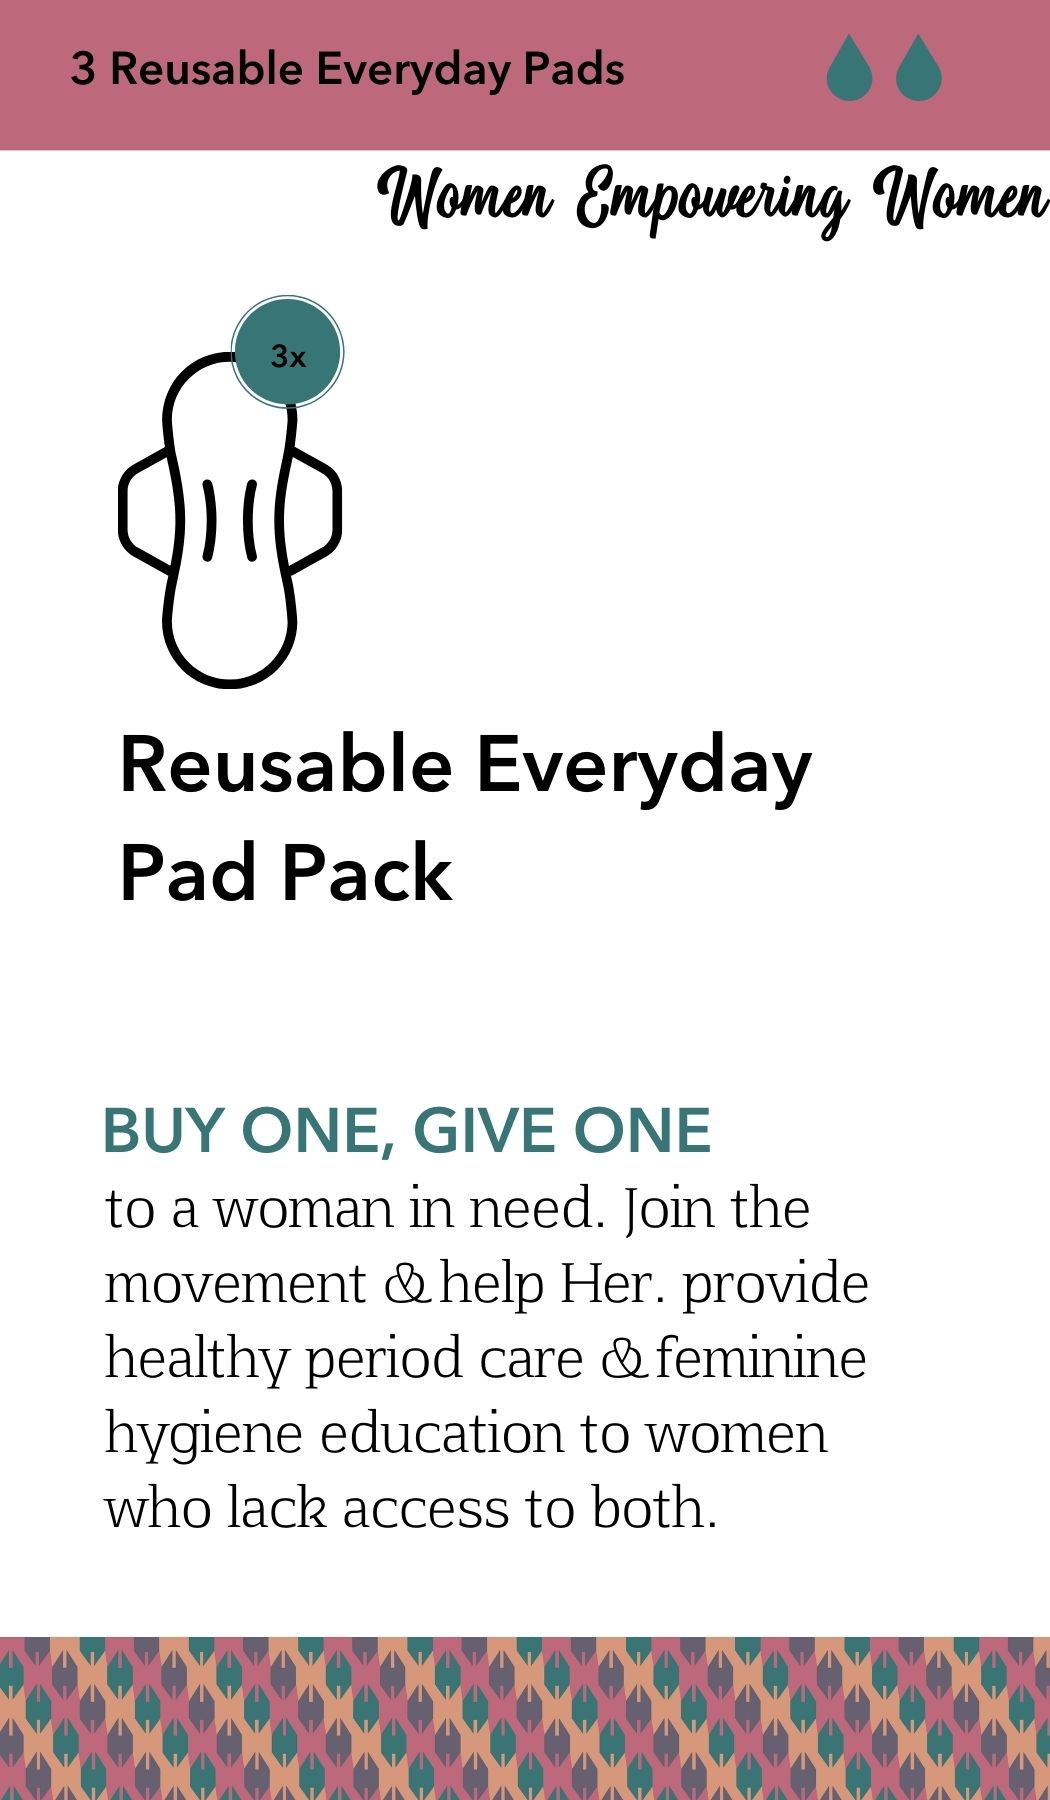 Everyday Reusable Pad Pack